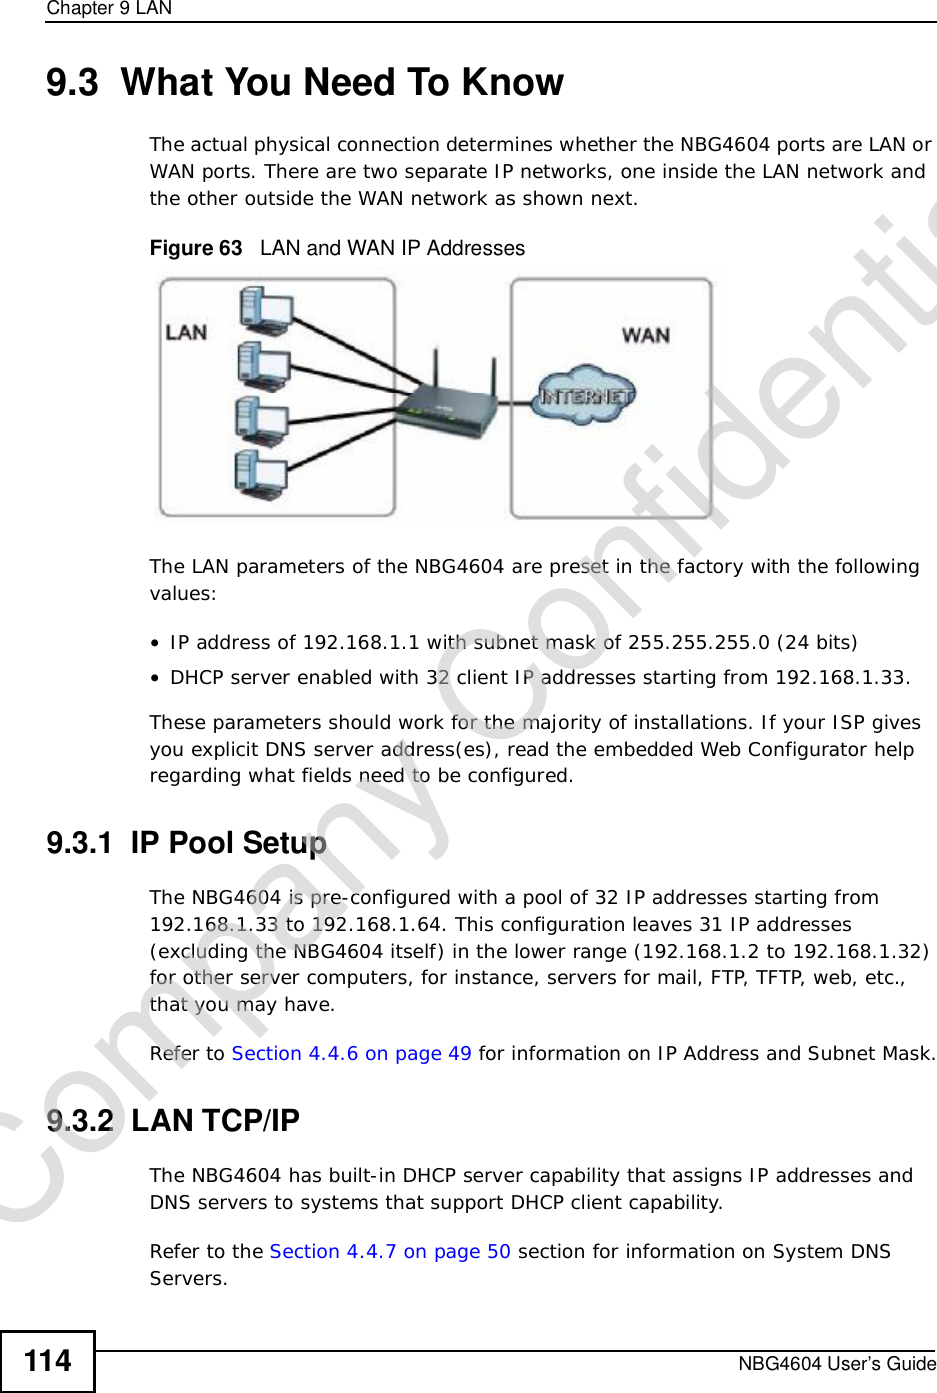 Chapter 9LANNBG4604 User’s Guide1149.3  What You Need To KnowThe actual physical connection determines whether the NBG4604 ports are LAN or WAN ports. There are two separate IP networks, one inside the LAN network and the other outside the WAN network as shown next.Figure 63   LAN and WAN IP AddressesThe LAN parameters of the NBG4604 are preset in the factory with the following values:•IP address of 192.168.1.1 with subnet mask of 255.255.255.0 (24 bits)•DHCP server enabled with 32 client IP addresses starting from 192.168.1.33. These parameters should work for the majority of installations. If your ISP gives you explicit DNS server address(es), read the embedded Web Configurator help regarding what fields need to be configured.9.3.1  IP Pool SetupThe NBG4604 is pre-configured with a pool of 32 IP addresses starting from 192.168.1.33 to 192.168.1.64. This configuration leaves 31 IP addresses (excluding the NBG4604 itself) in the lower range (192.168.1.2 to 192.168.1.32) for other server computers, for instance, servers for mail, FTP, TFTP, web, etc., that you may have.Refer to Section 4.4.6 on page 49 for information on IP Address and Subnet Mask.9.3.2  LAN TCP/IP The NBG4604 has built-in DHCP server capability that assigns IP addresses and DNS servers to systems that support DHCP client capability.Refer to the Section 4.4.7 on page 50 section for information on System DNS Servers.Company Confidential